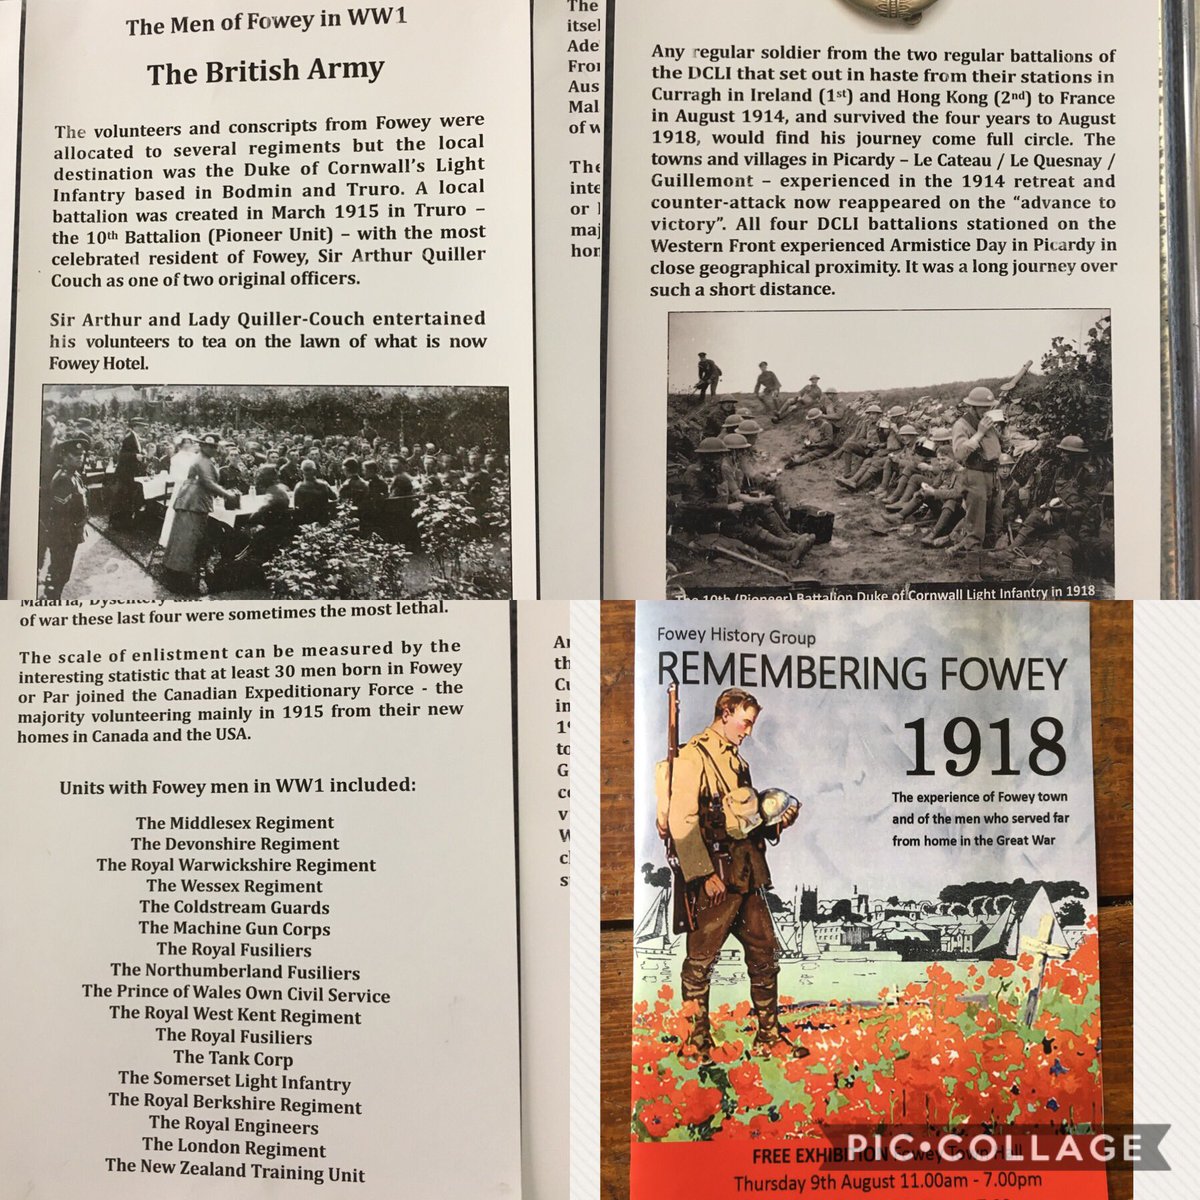 Men of #Fowey #Cornwall & the regiments they joined at new #WW1 exhibition @MiddlesexReg57 @TheKeepMuseum @ColdstreamGds @MGCOCA @RNFRBF5 @UntoldLives @DacorumHeritage @fotguildhall @FusiliersLondon @thesomersets @SomersetLInf @rbrbiscuits @London_Regt @WW100NZ @Remembered2018